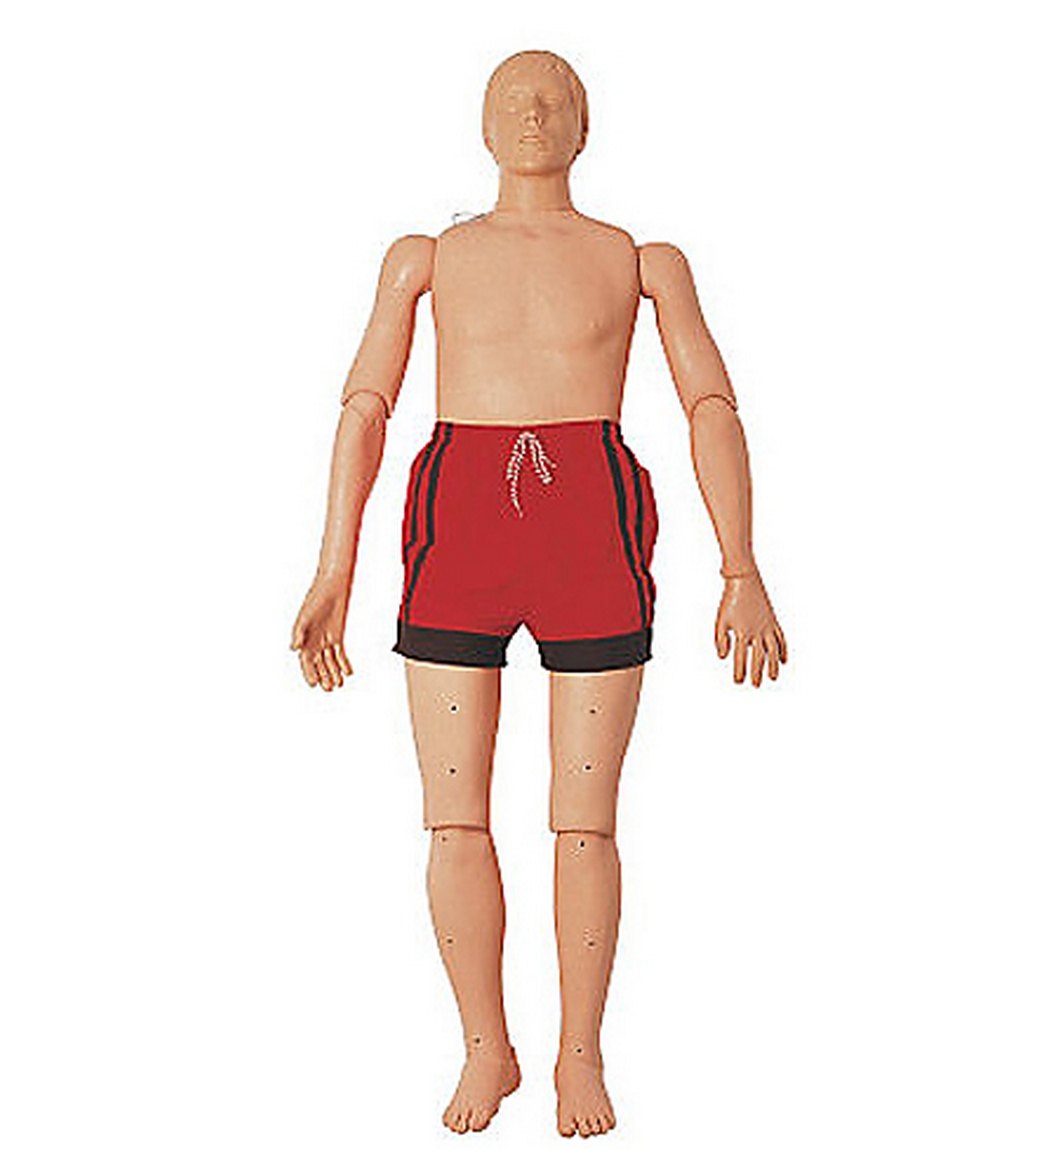 Simulaids Adult CPR Water Rescue Manikin